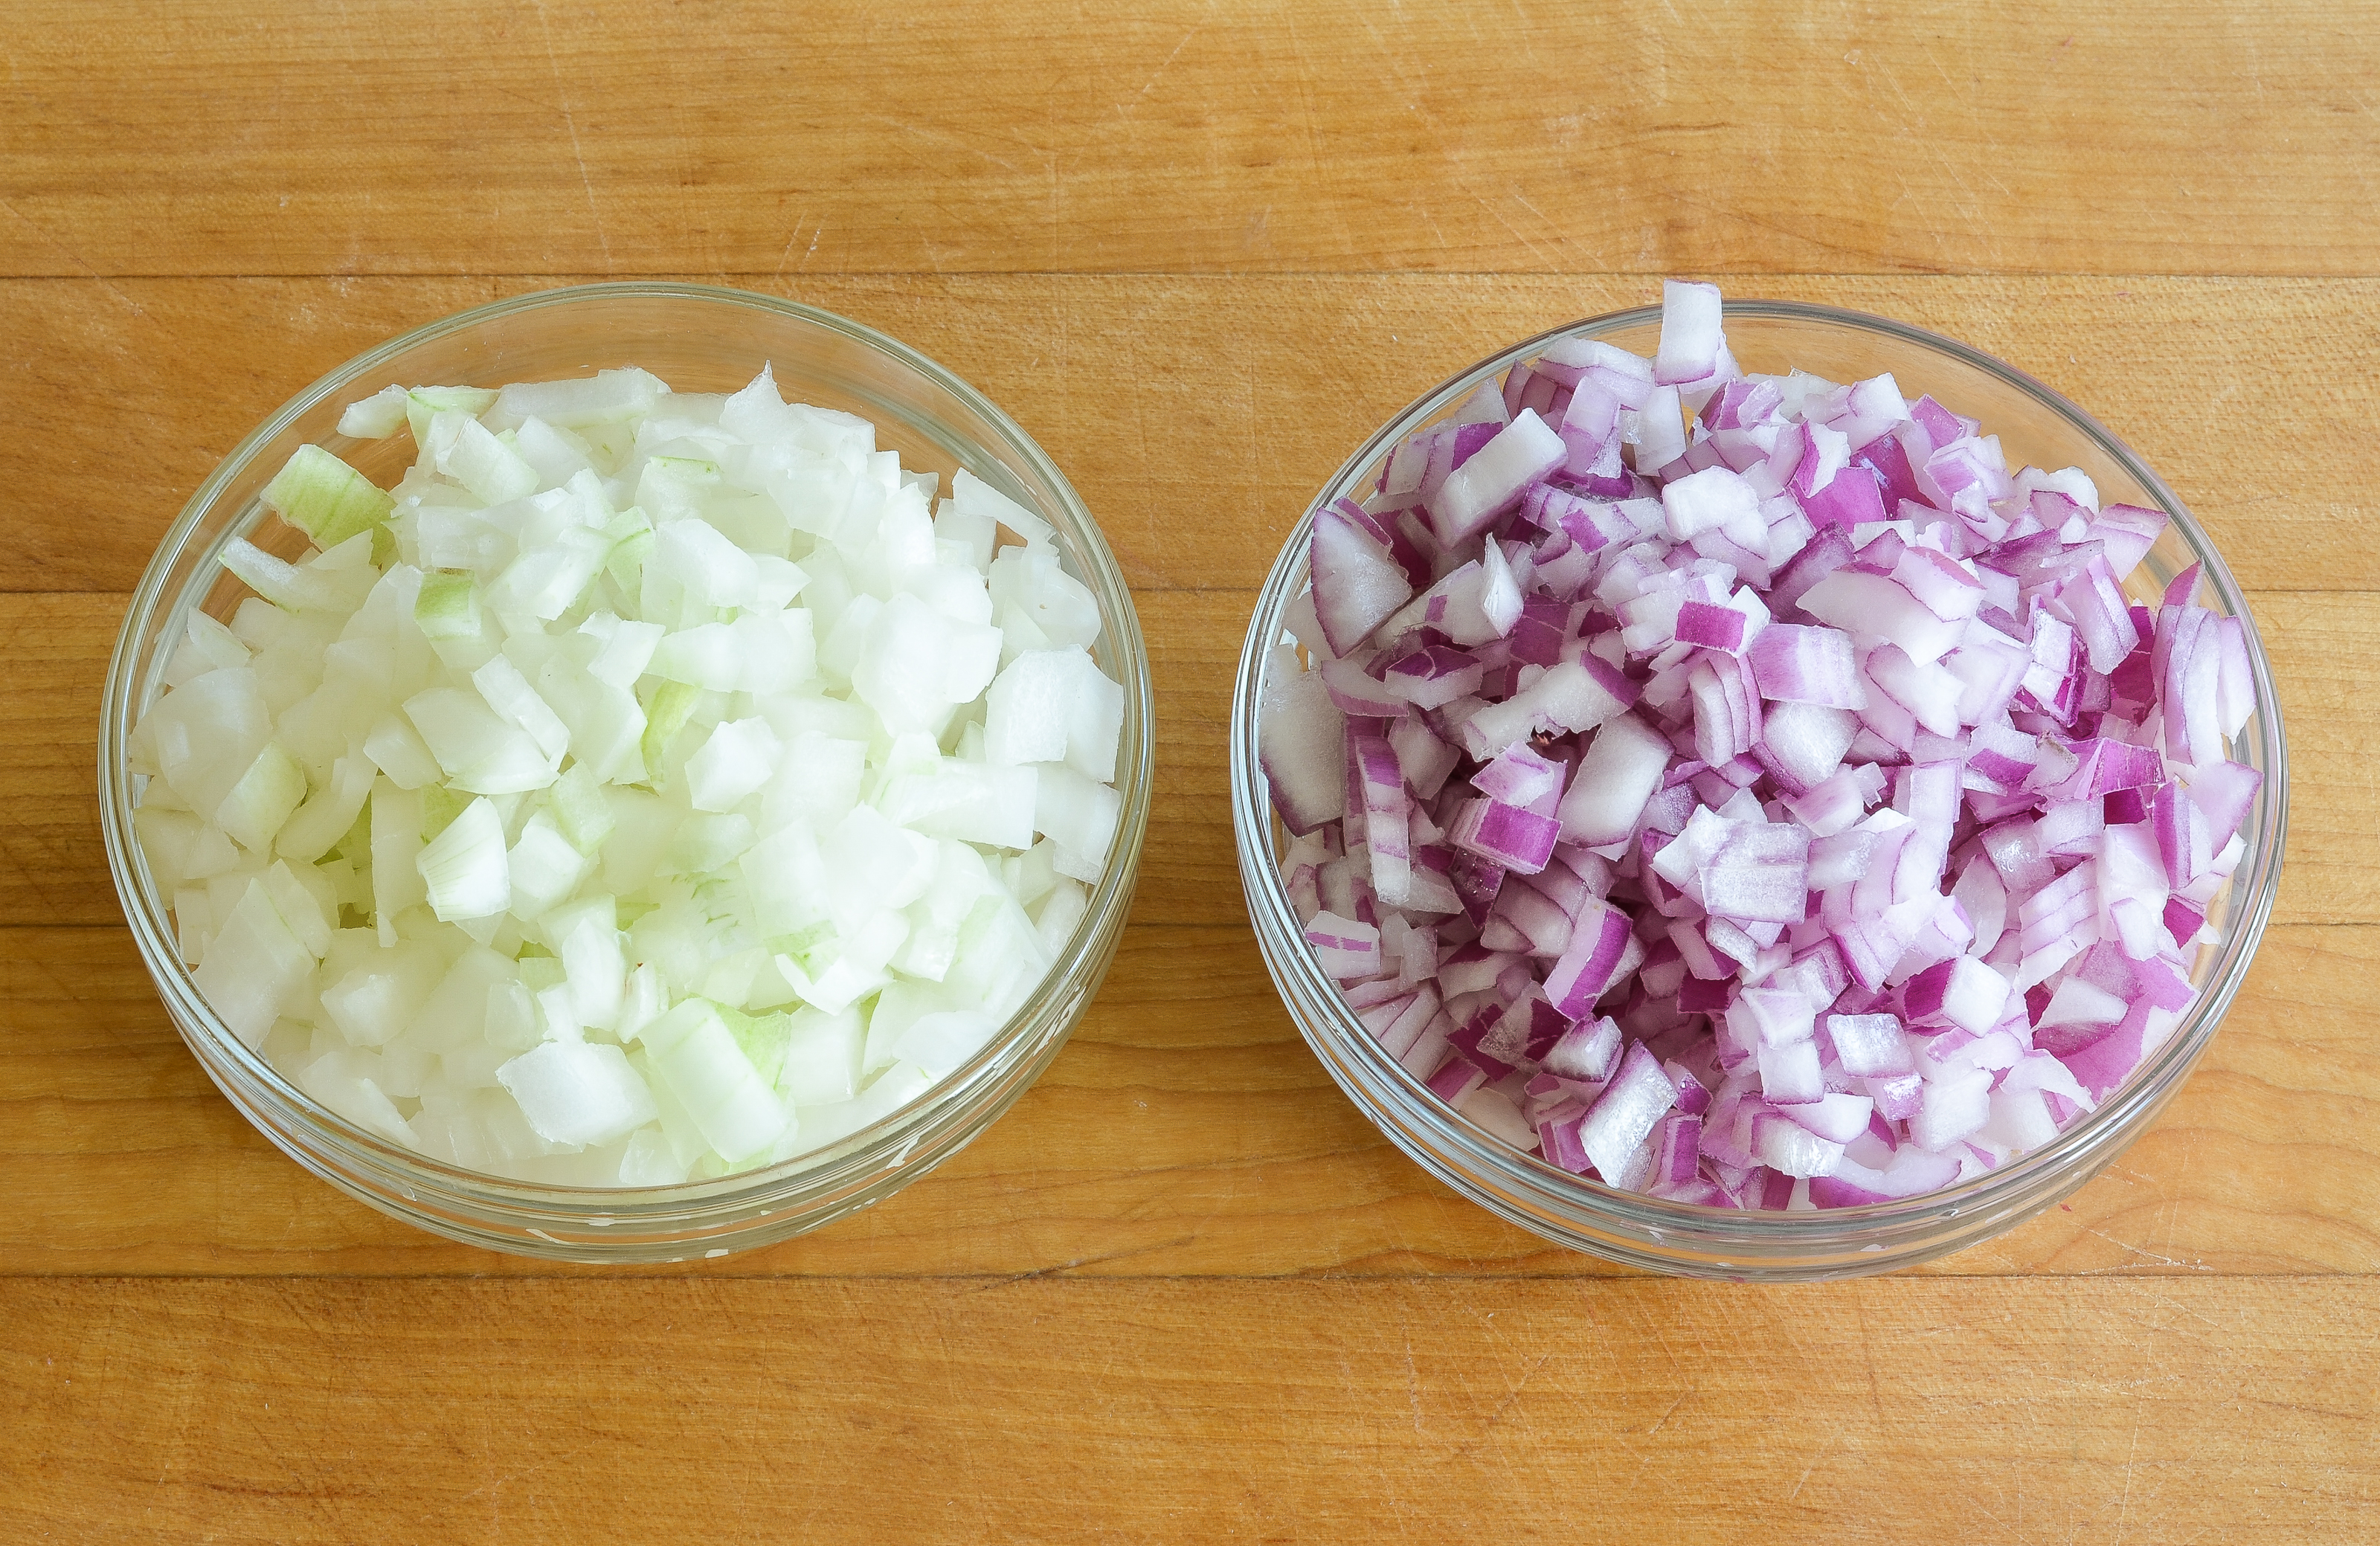 https://www.onceuponachef.com/images/2019/09/How-To-Chop-An-Onion.jpg